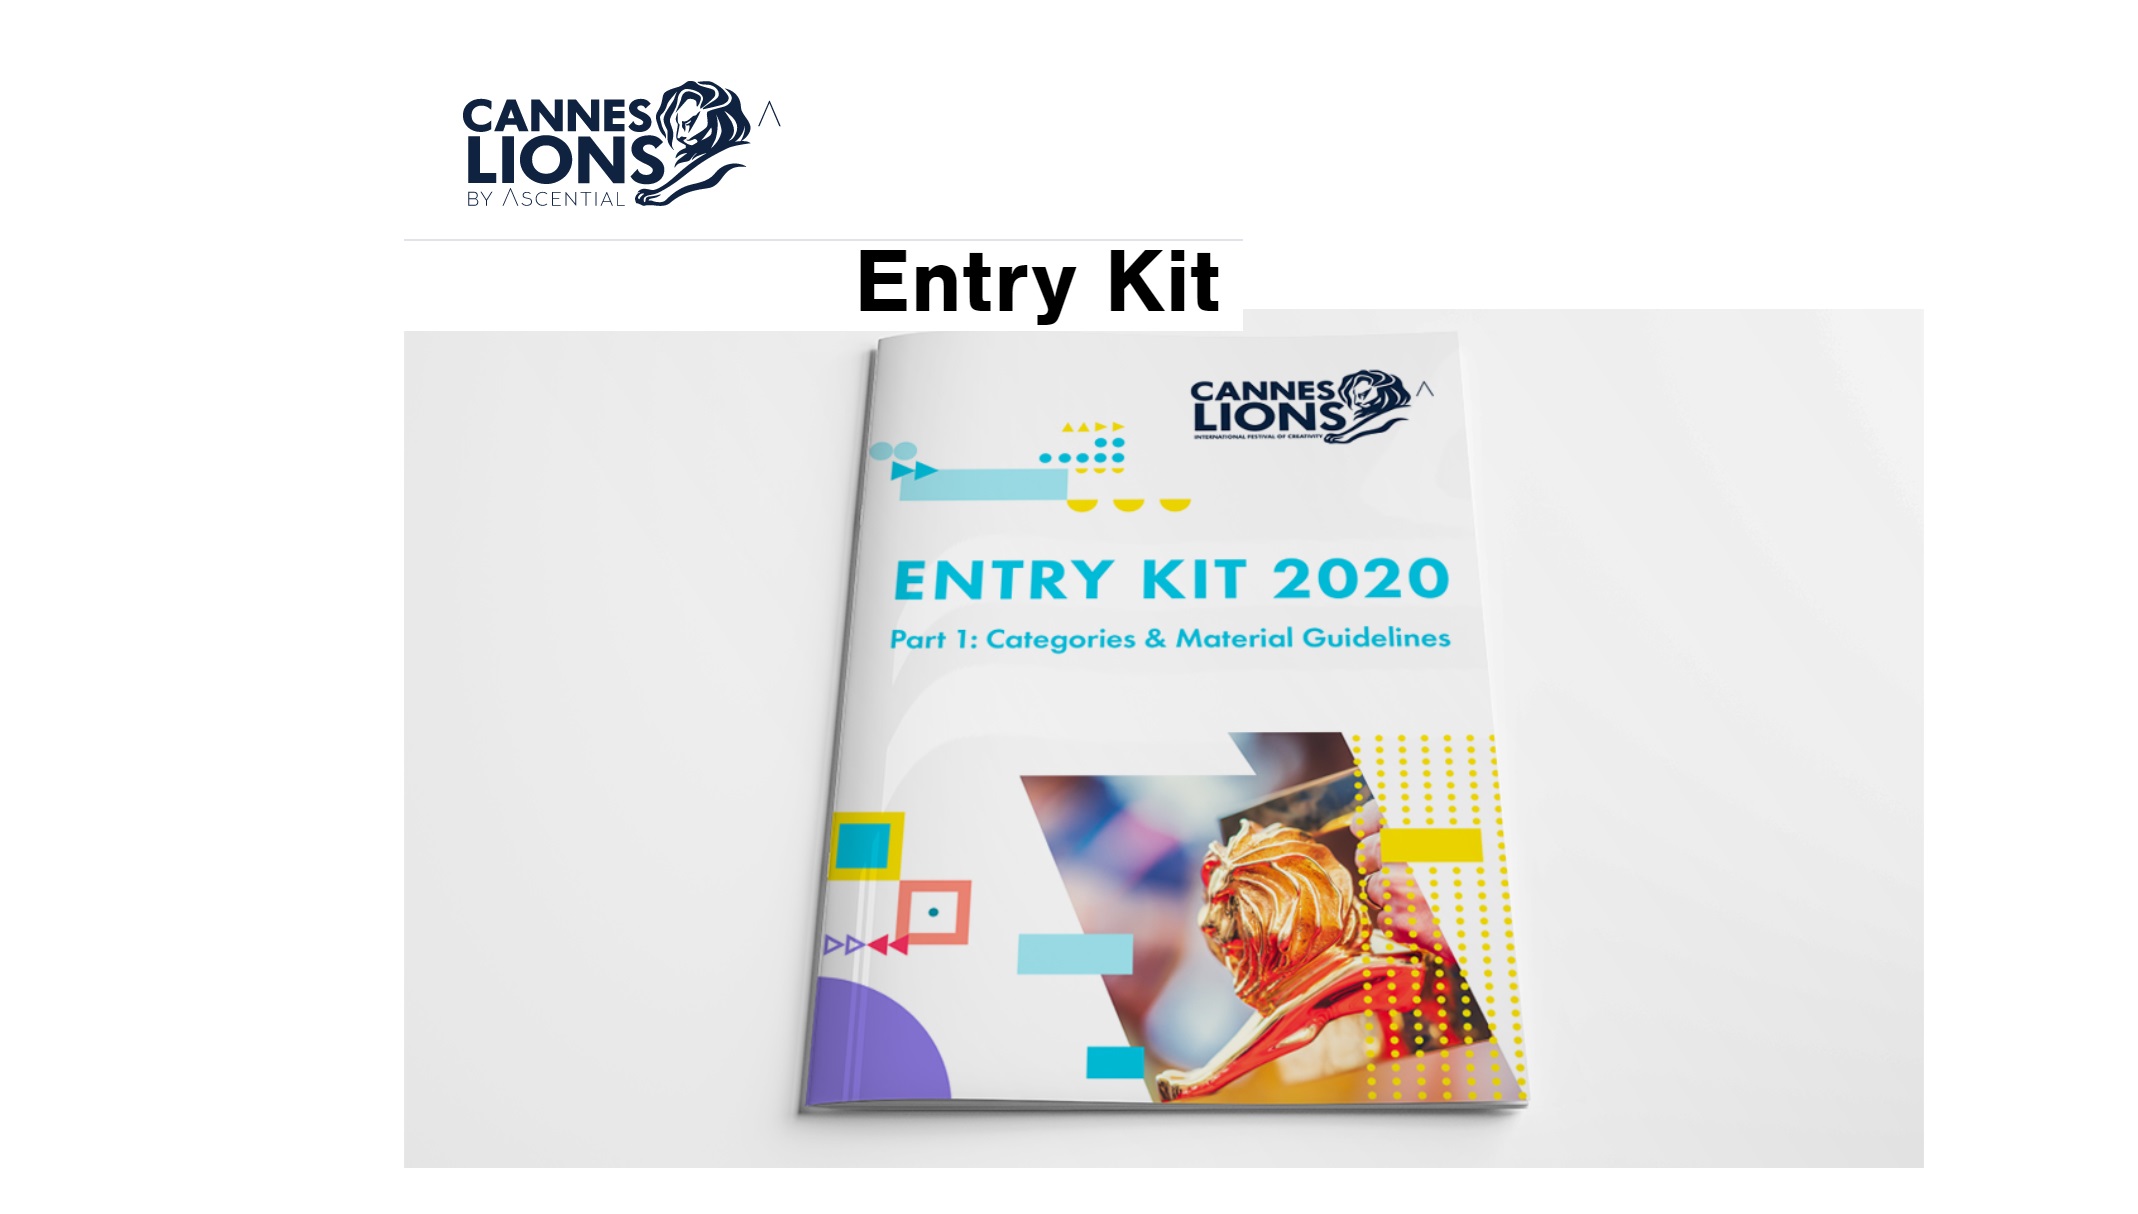 cannes lionss, entry, kits, 2021,programapublicidad